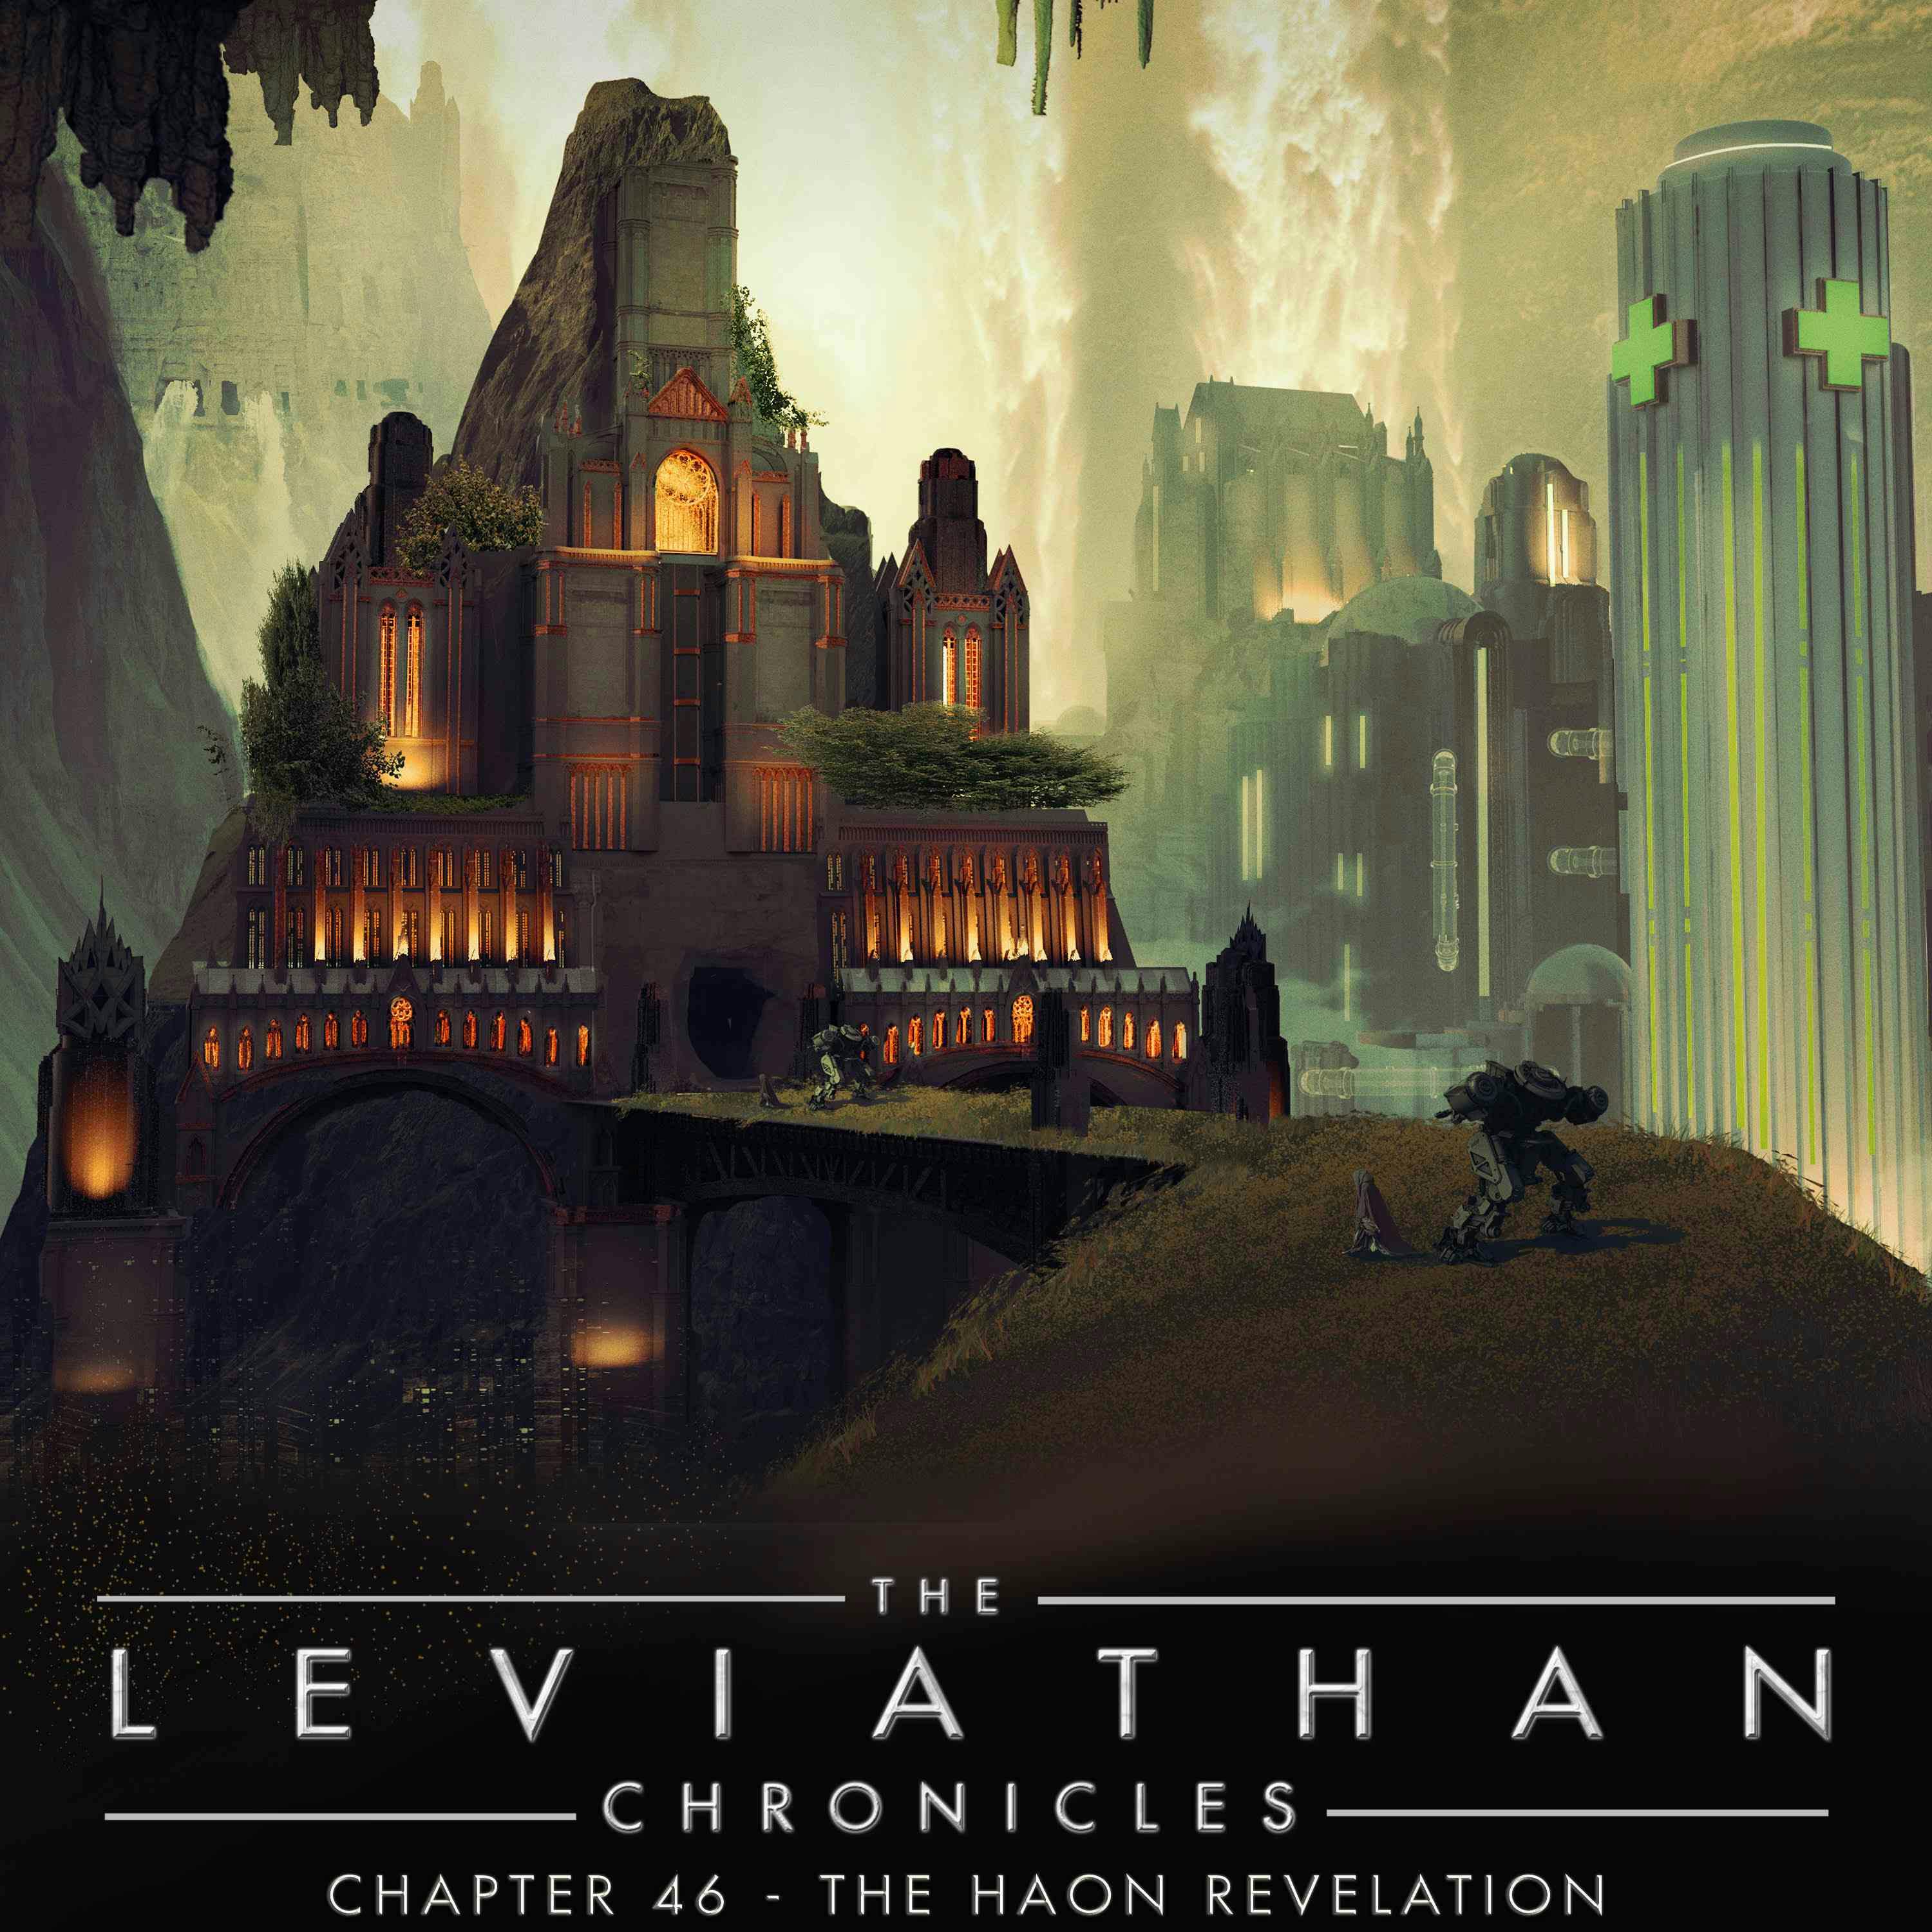 The Leviathan Chronicles | Chapter 46 - The Haon Revelation